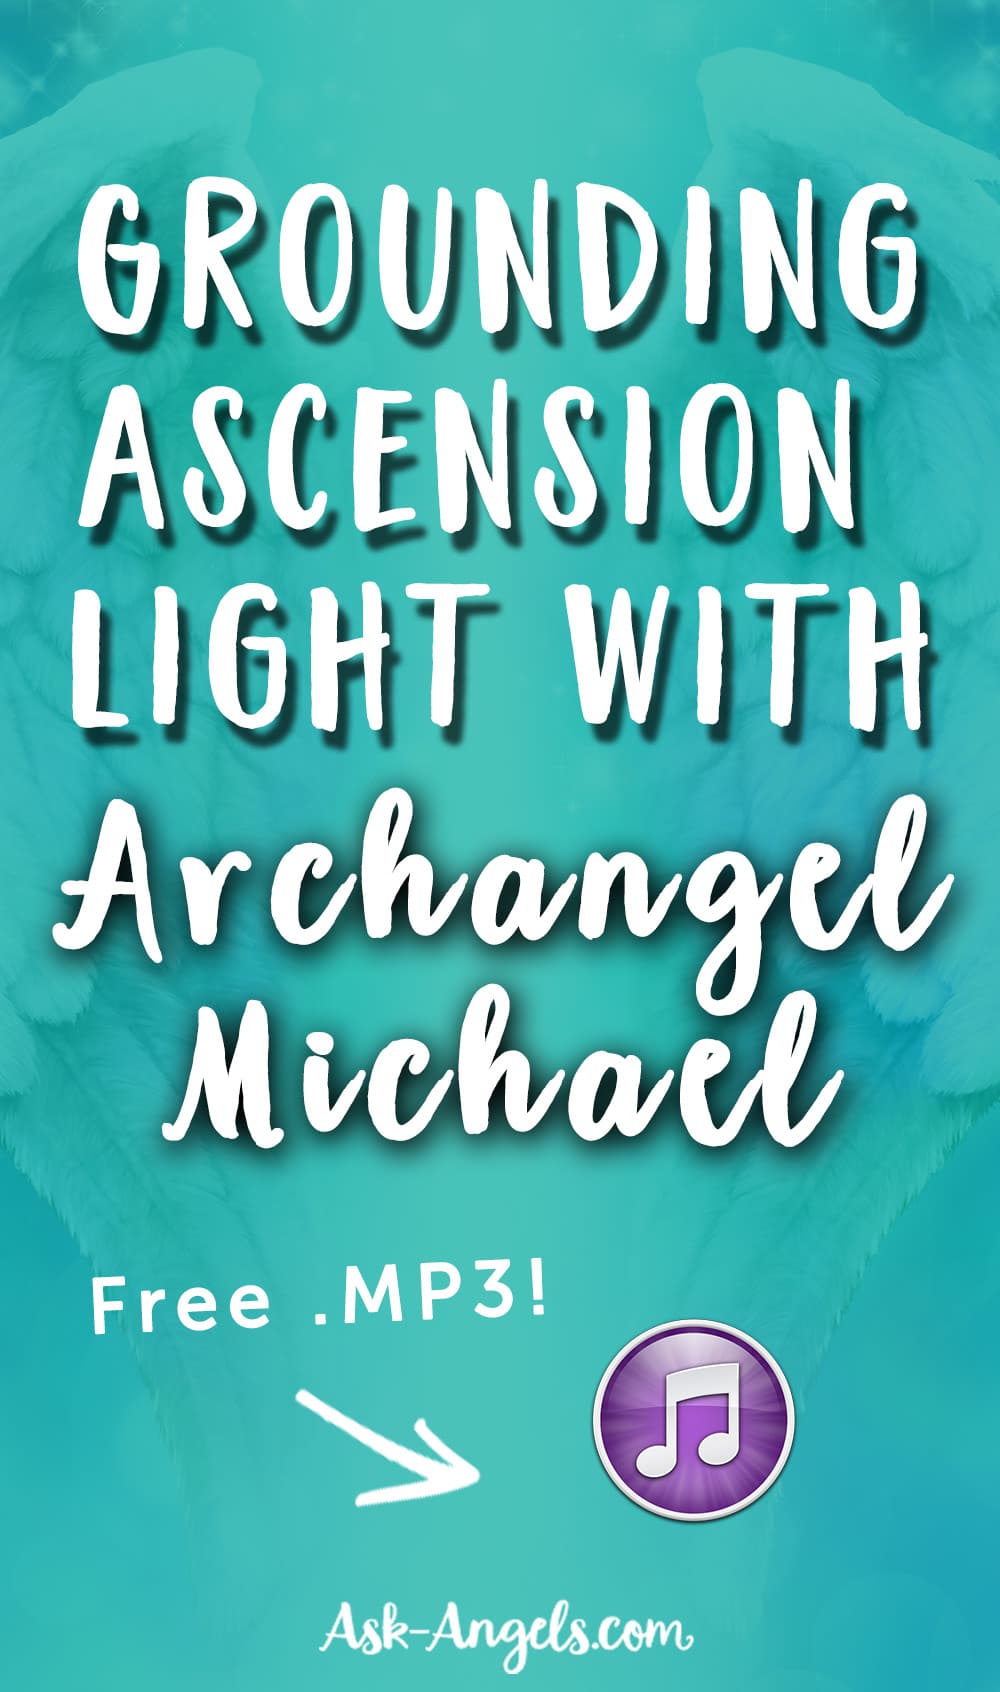 Grounding Ascension Light with Archangel Michael